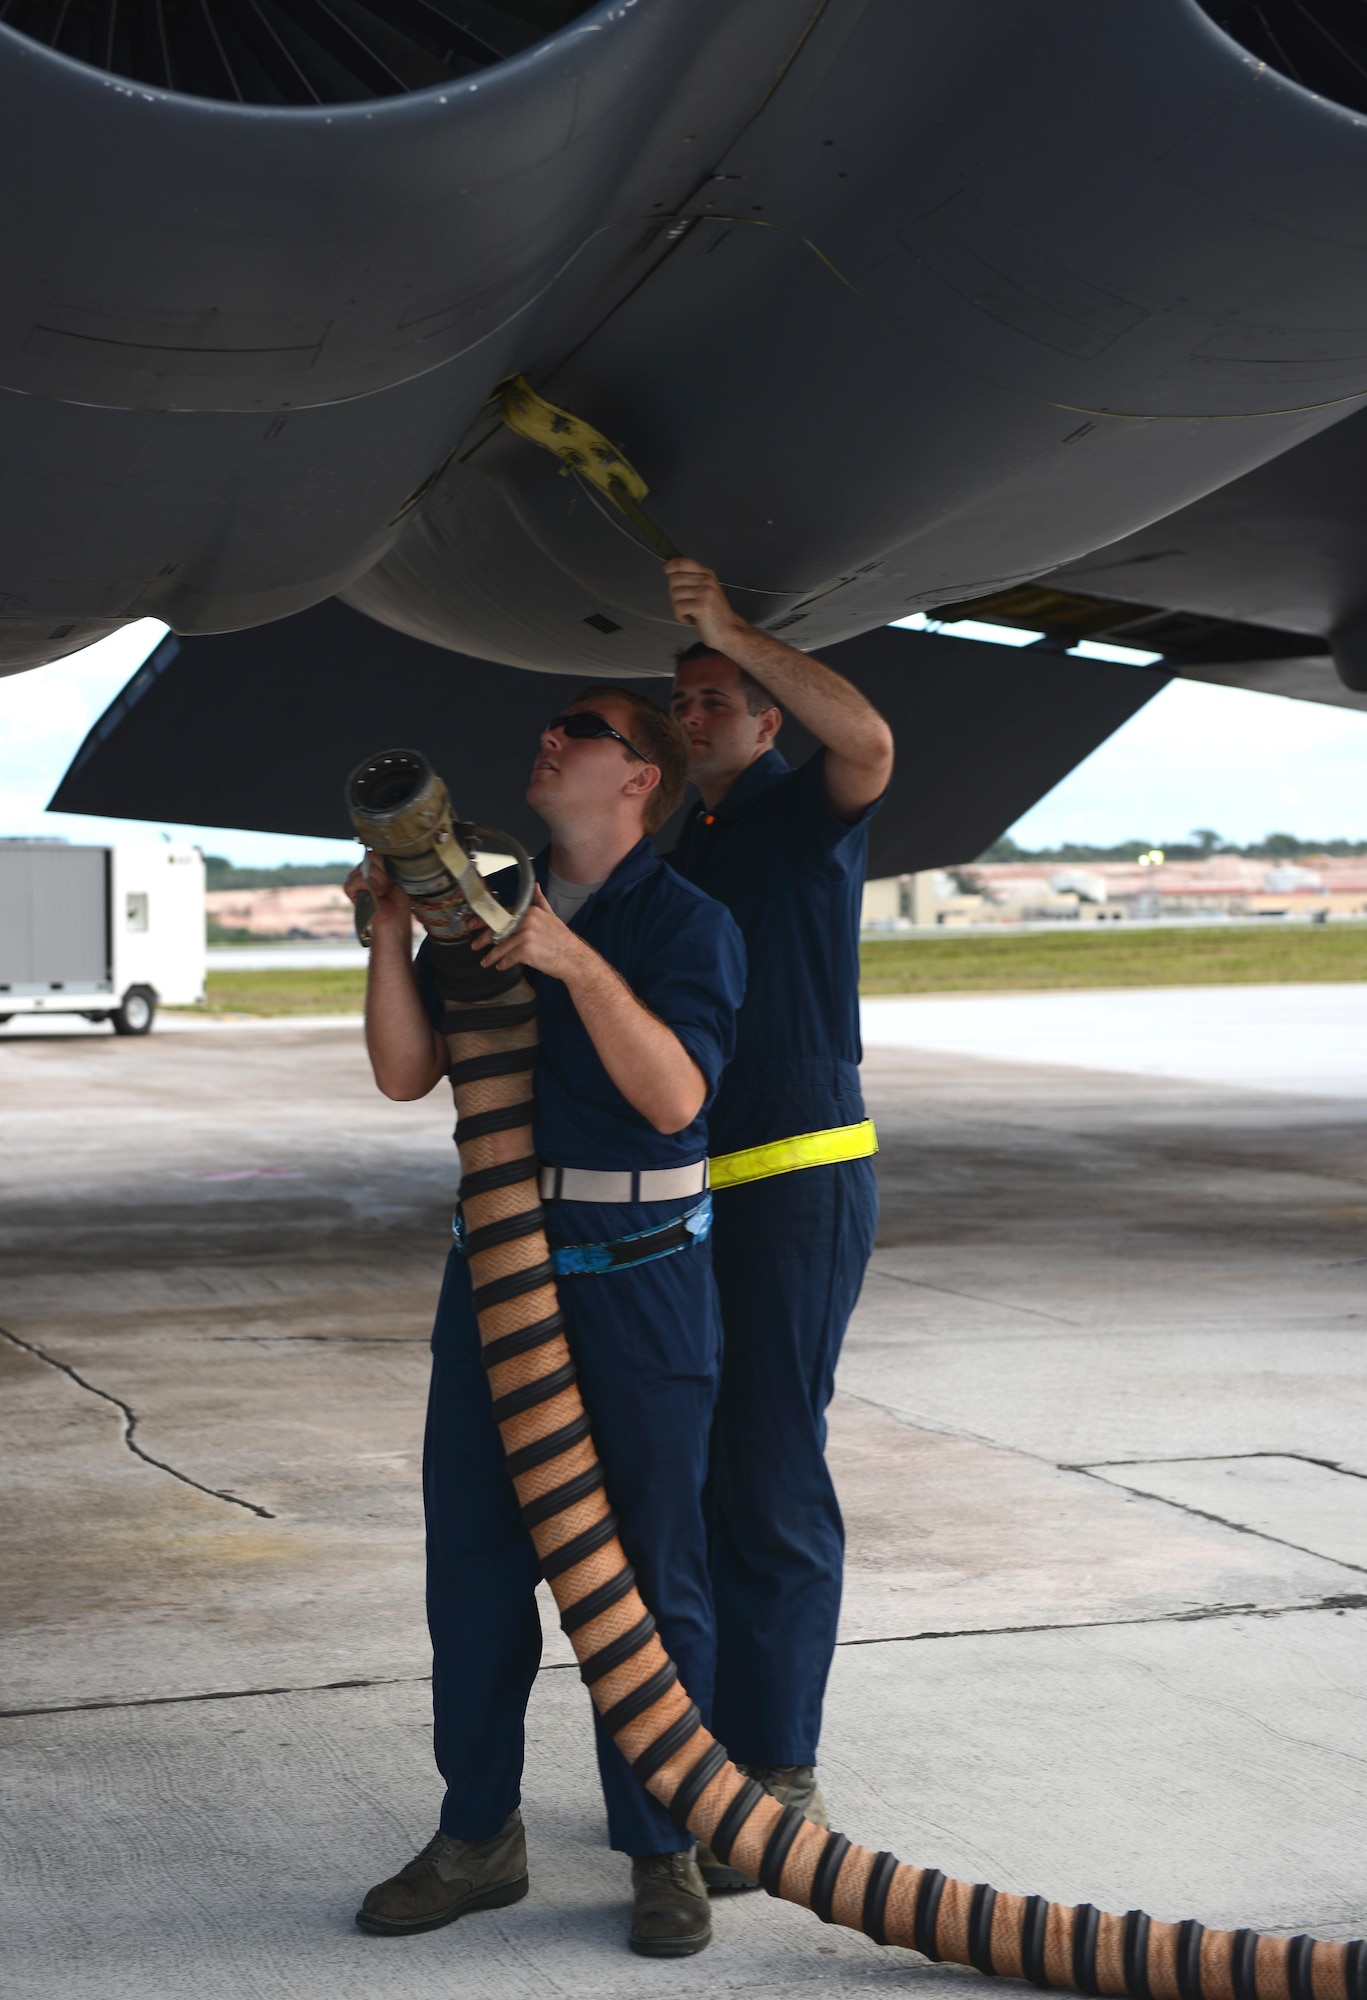 Crew chiefs with the 36th Expeditionary Aircraft Maintenance Squadron connect an aircraft hose to start an engine of a U.S. Air Force B-52 Stratofortress bomber April 14, 2016, at Andersen Air Force Base, Guam. The U.S. Pacific Command has maintained a rotational strategic bomber presence in the Indo-Asia-Pacific region for more than a decade. (U.S. Air Force photo by Airman 1st Class Arielle Vasquez/Released) 